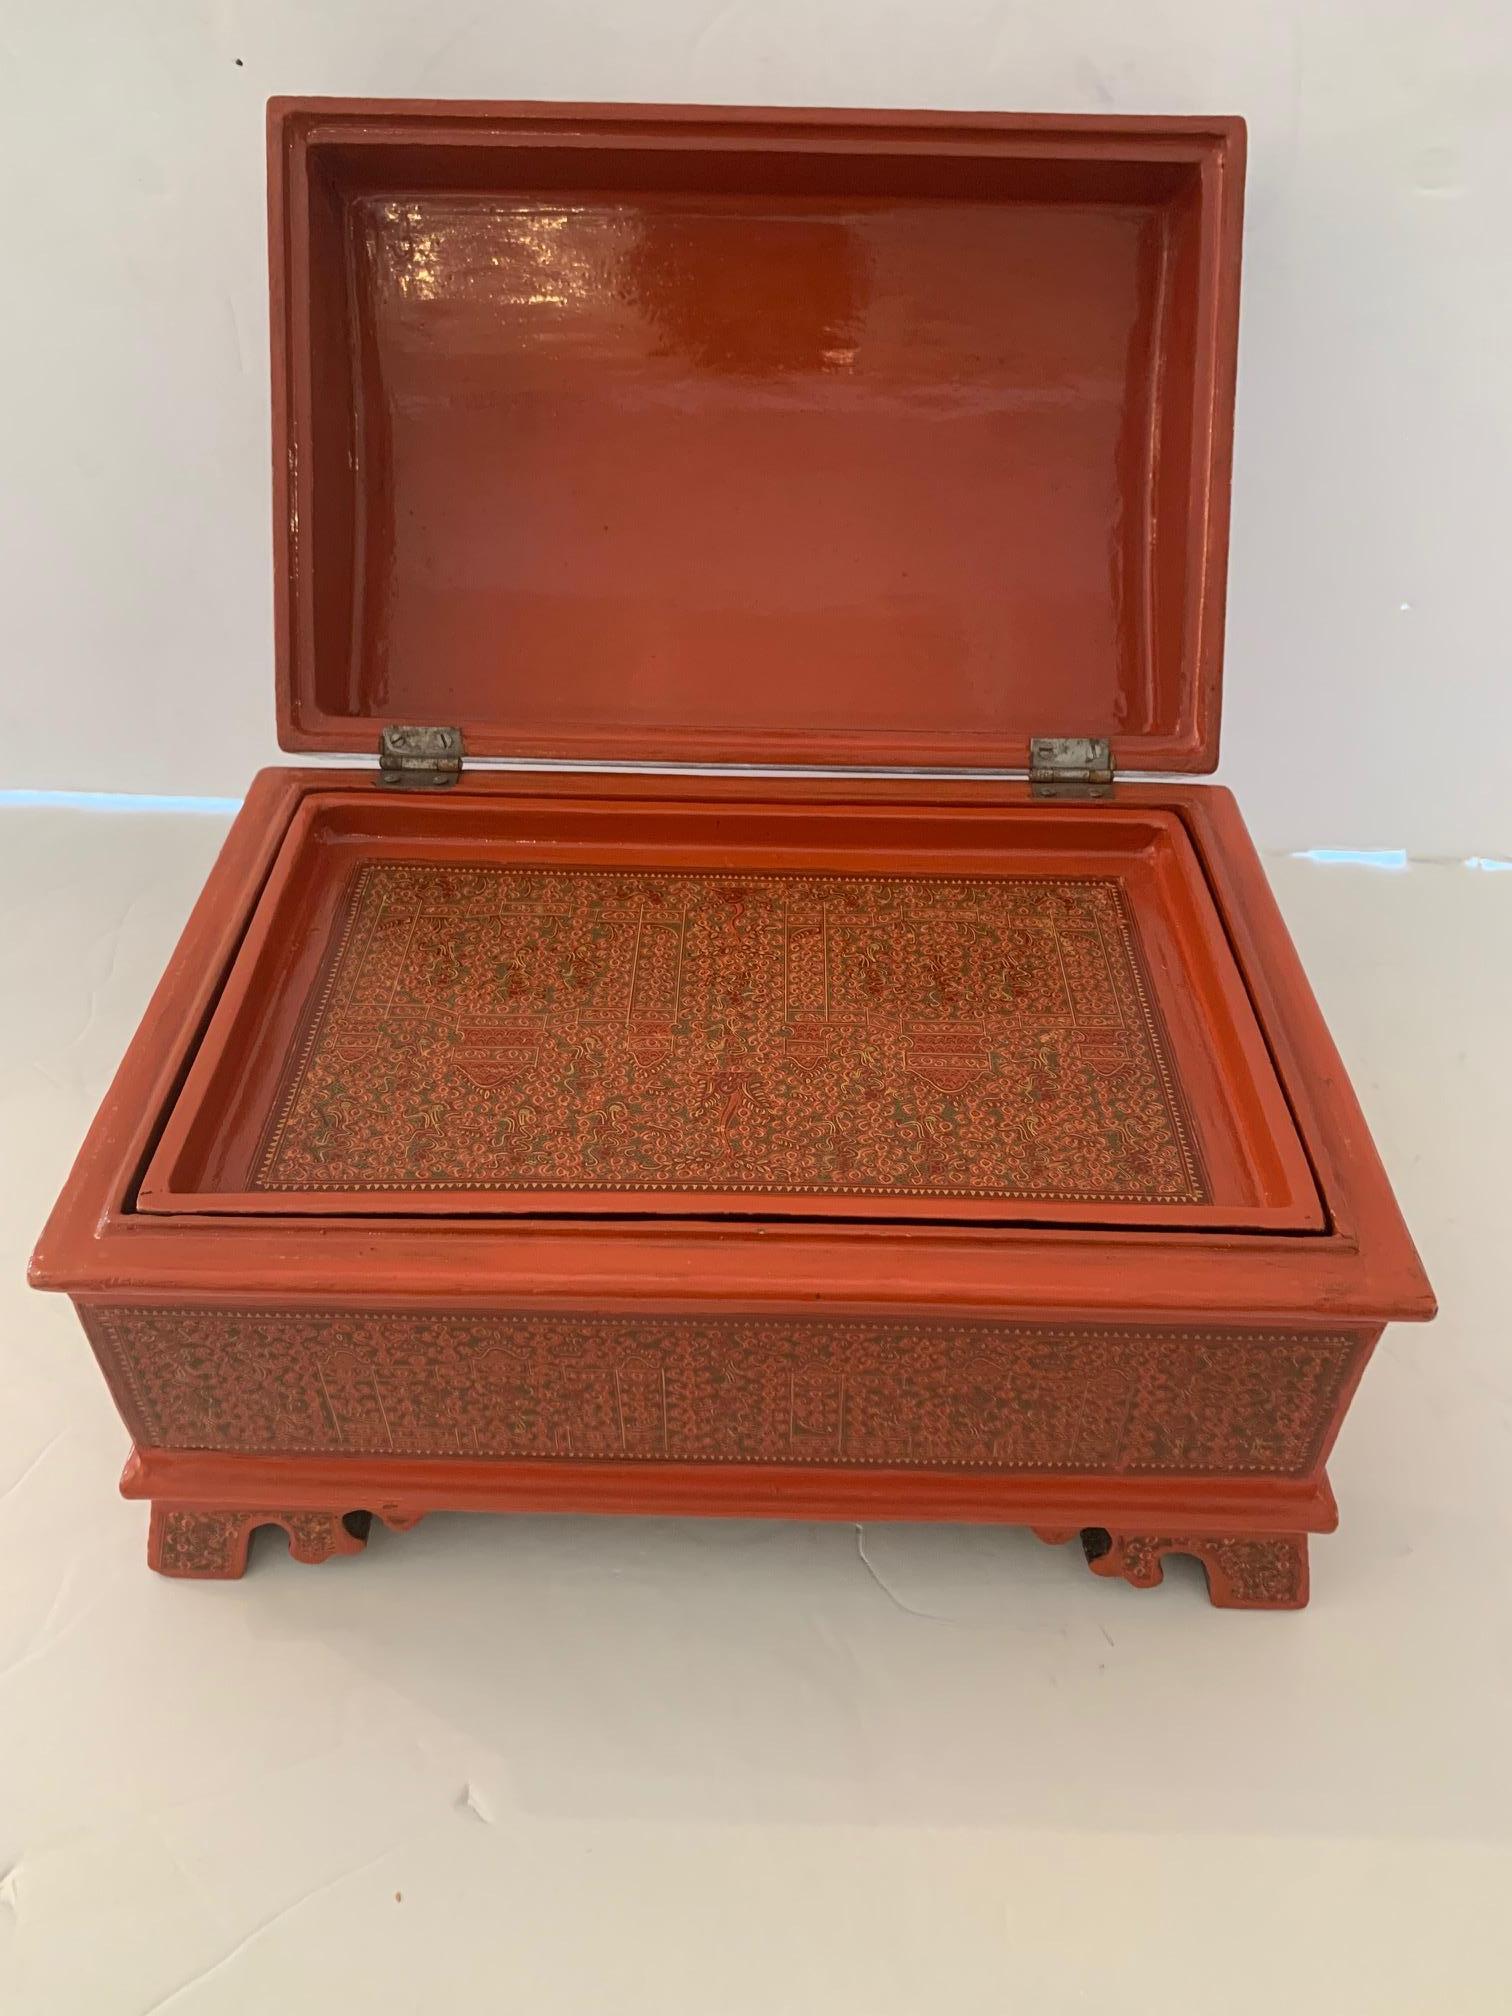 A gorgeous decorative Asian box in a striking coral laquer with meticulously hand painted decoration. The top is dome shaped and opens to reveal a removable tray inside. The lovely shaped feet and intricacy of embellishment make this a true treasure